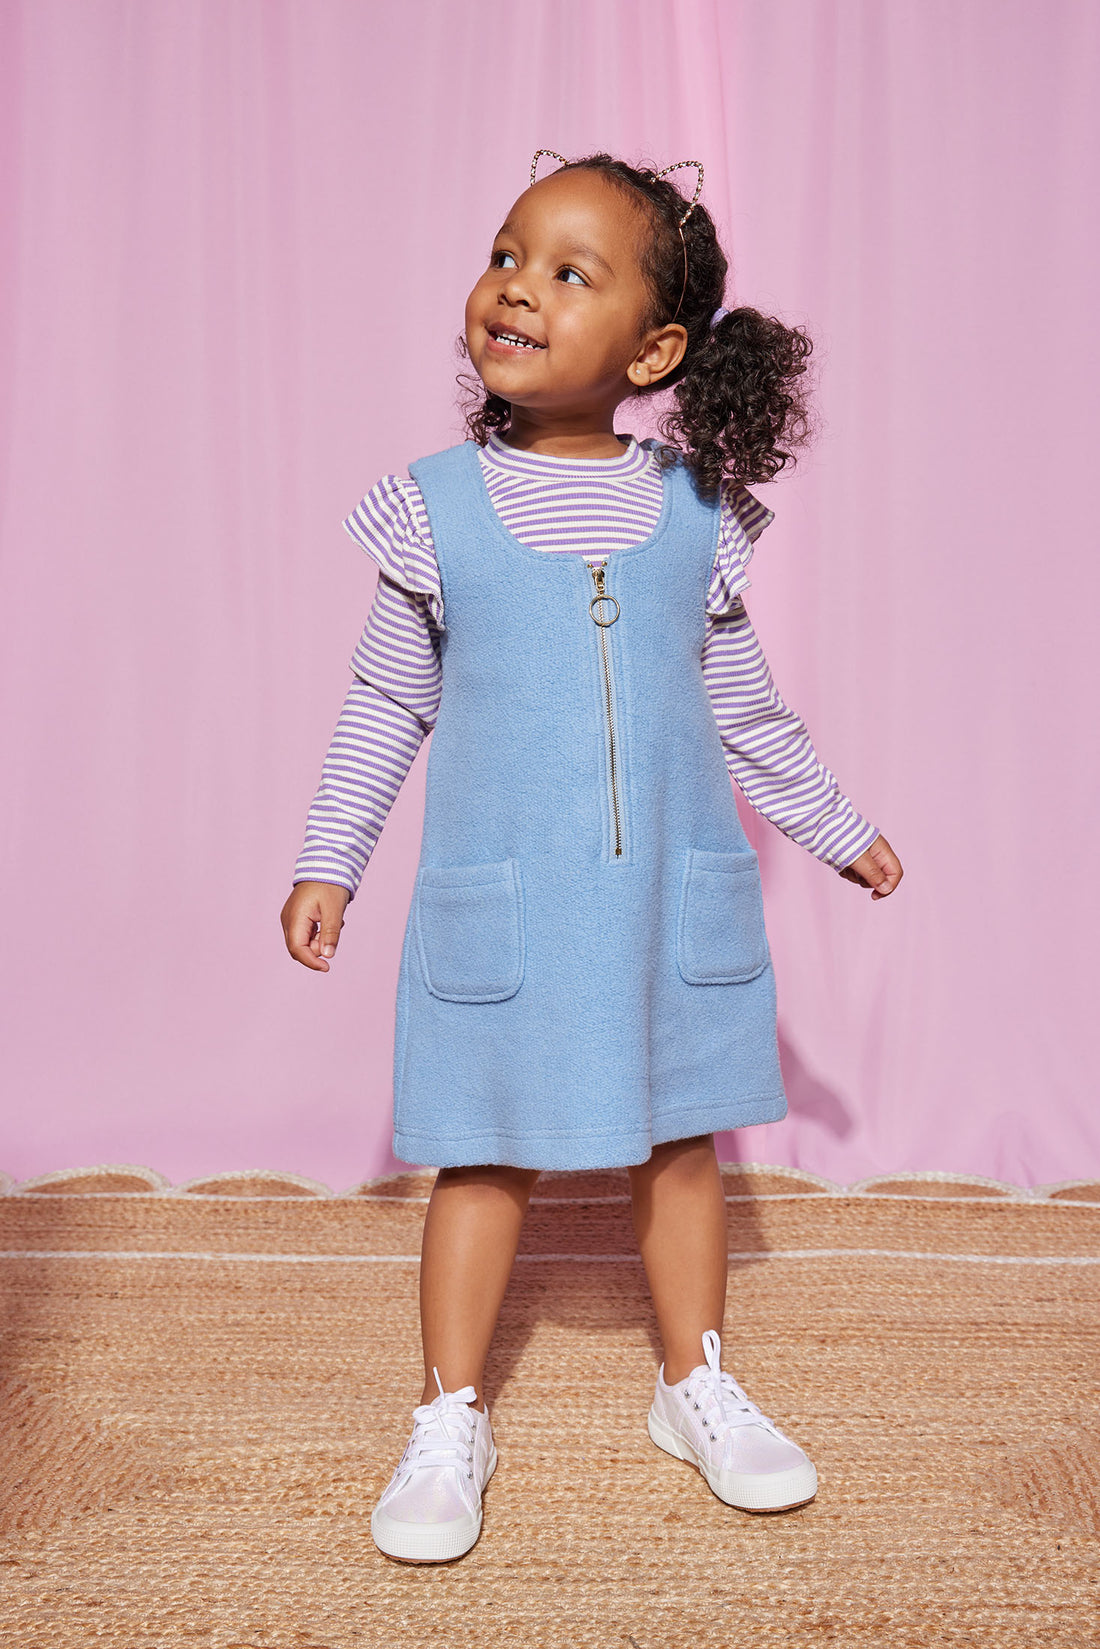 Our little model can be seen wearing our Retro Sherpa Jumper in Light blue with our Sadie Top in Lilac Sparkle Stripe layered underneath-BISBY girl